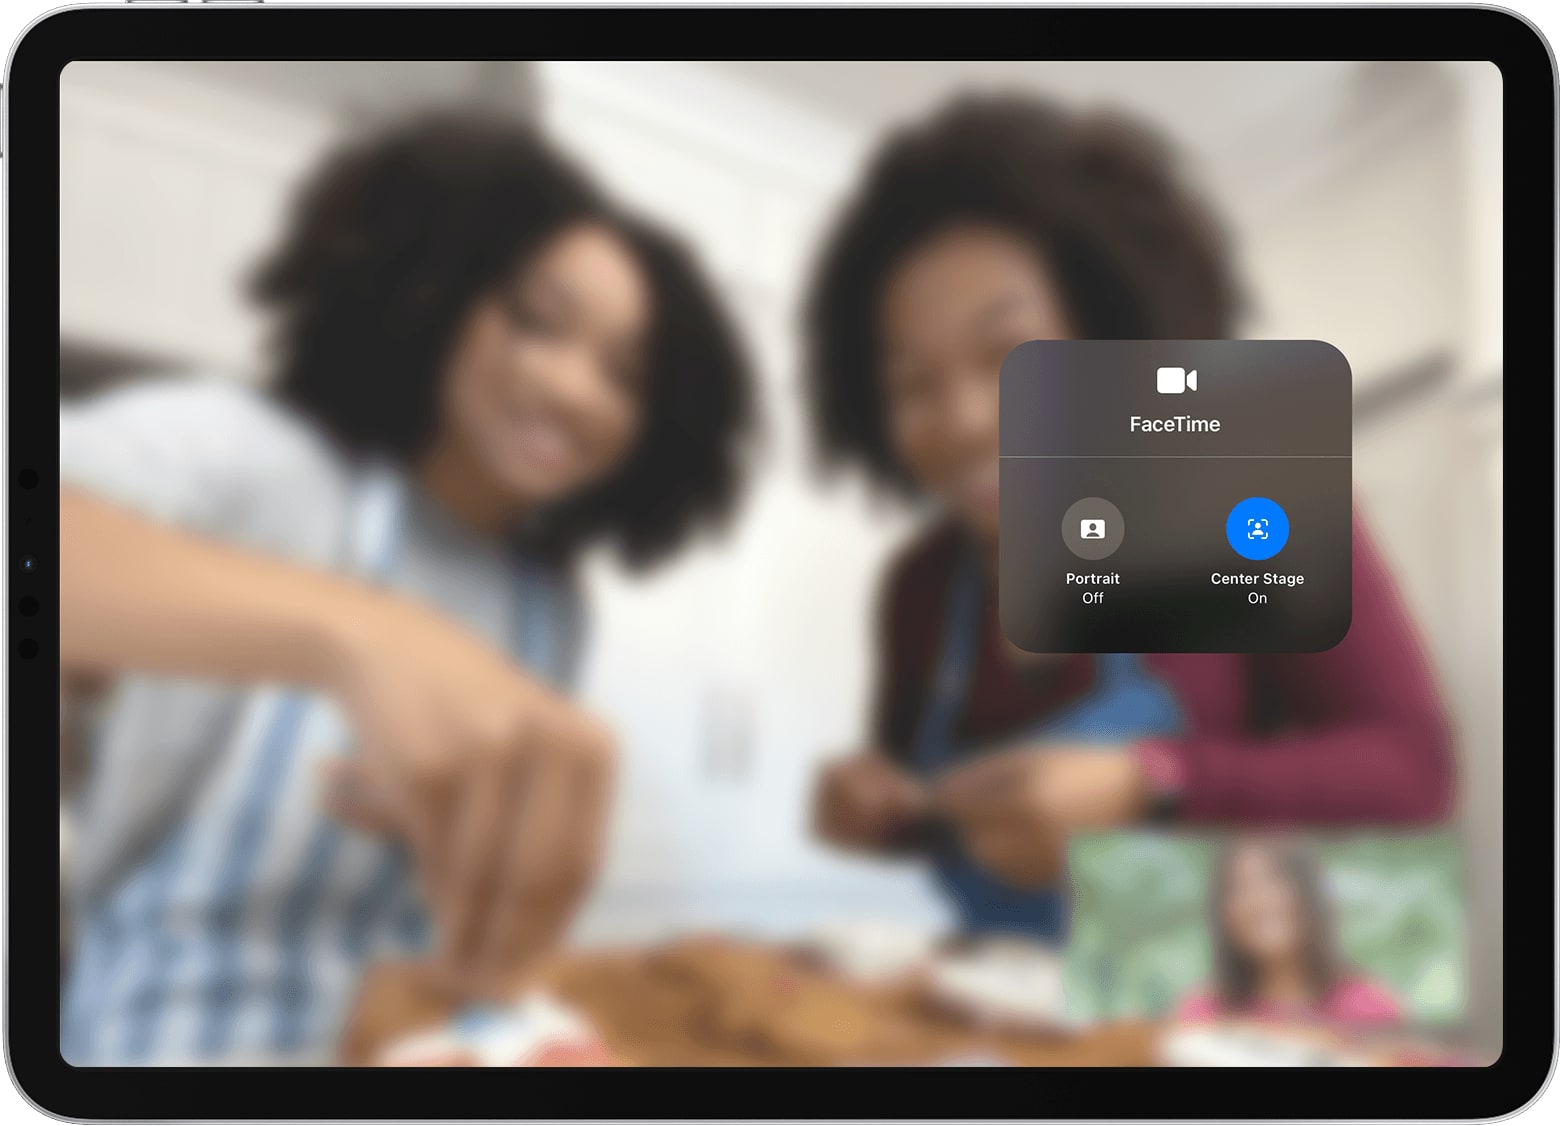 Apple's marketing image showing the iOS 15 Control Center overlay on iPad Pro with the Center Stage camera feature selected in the Video Effects menu, and a blurred FaceTime video call in the background 